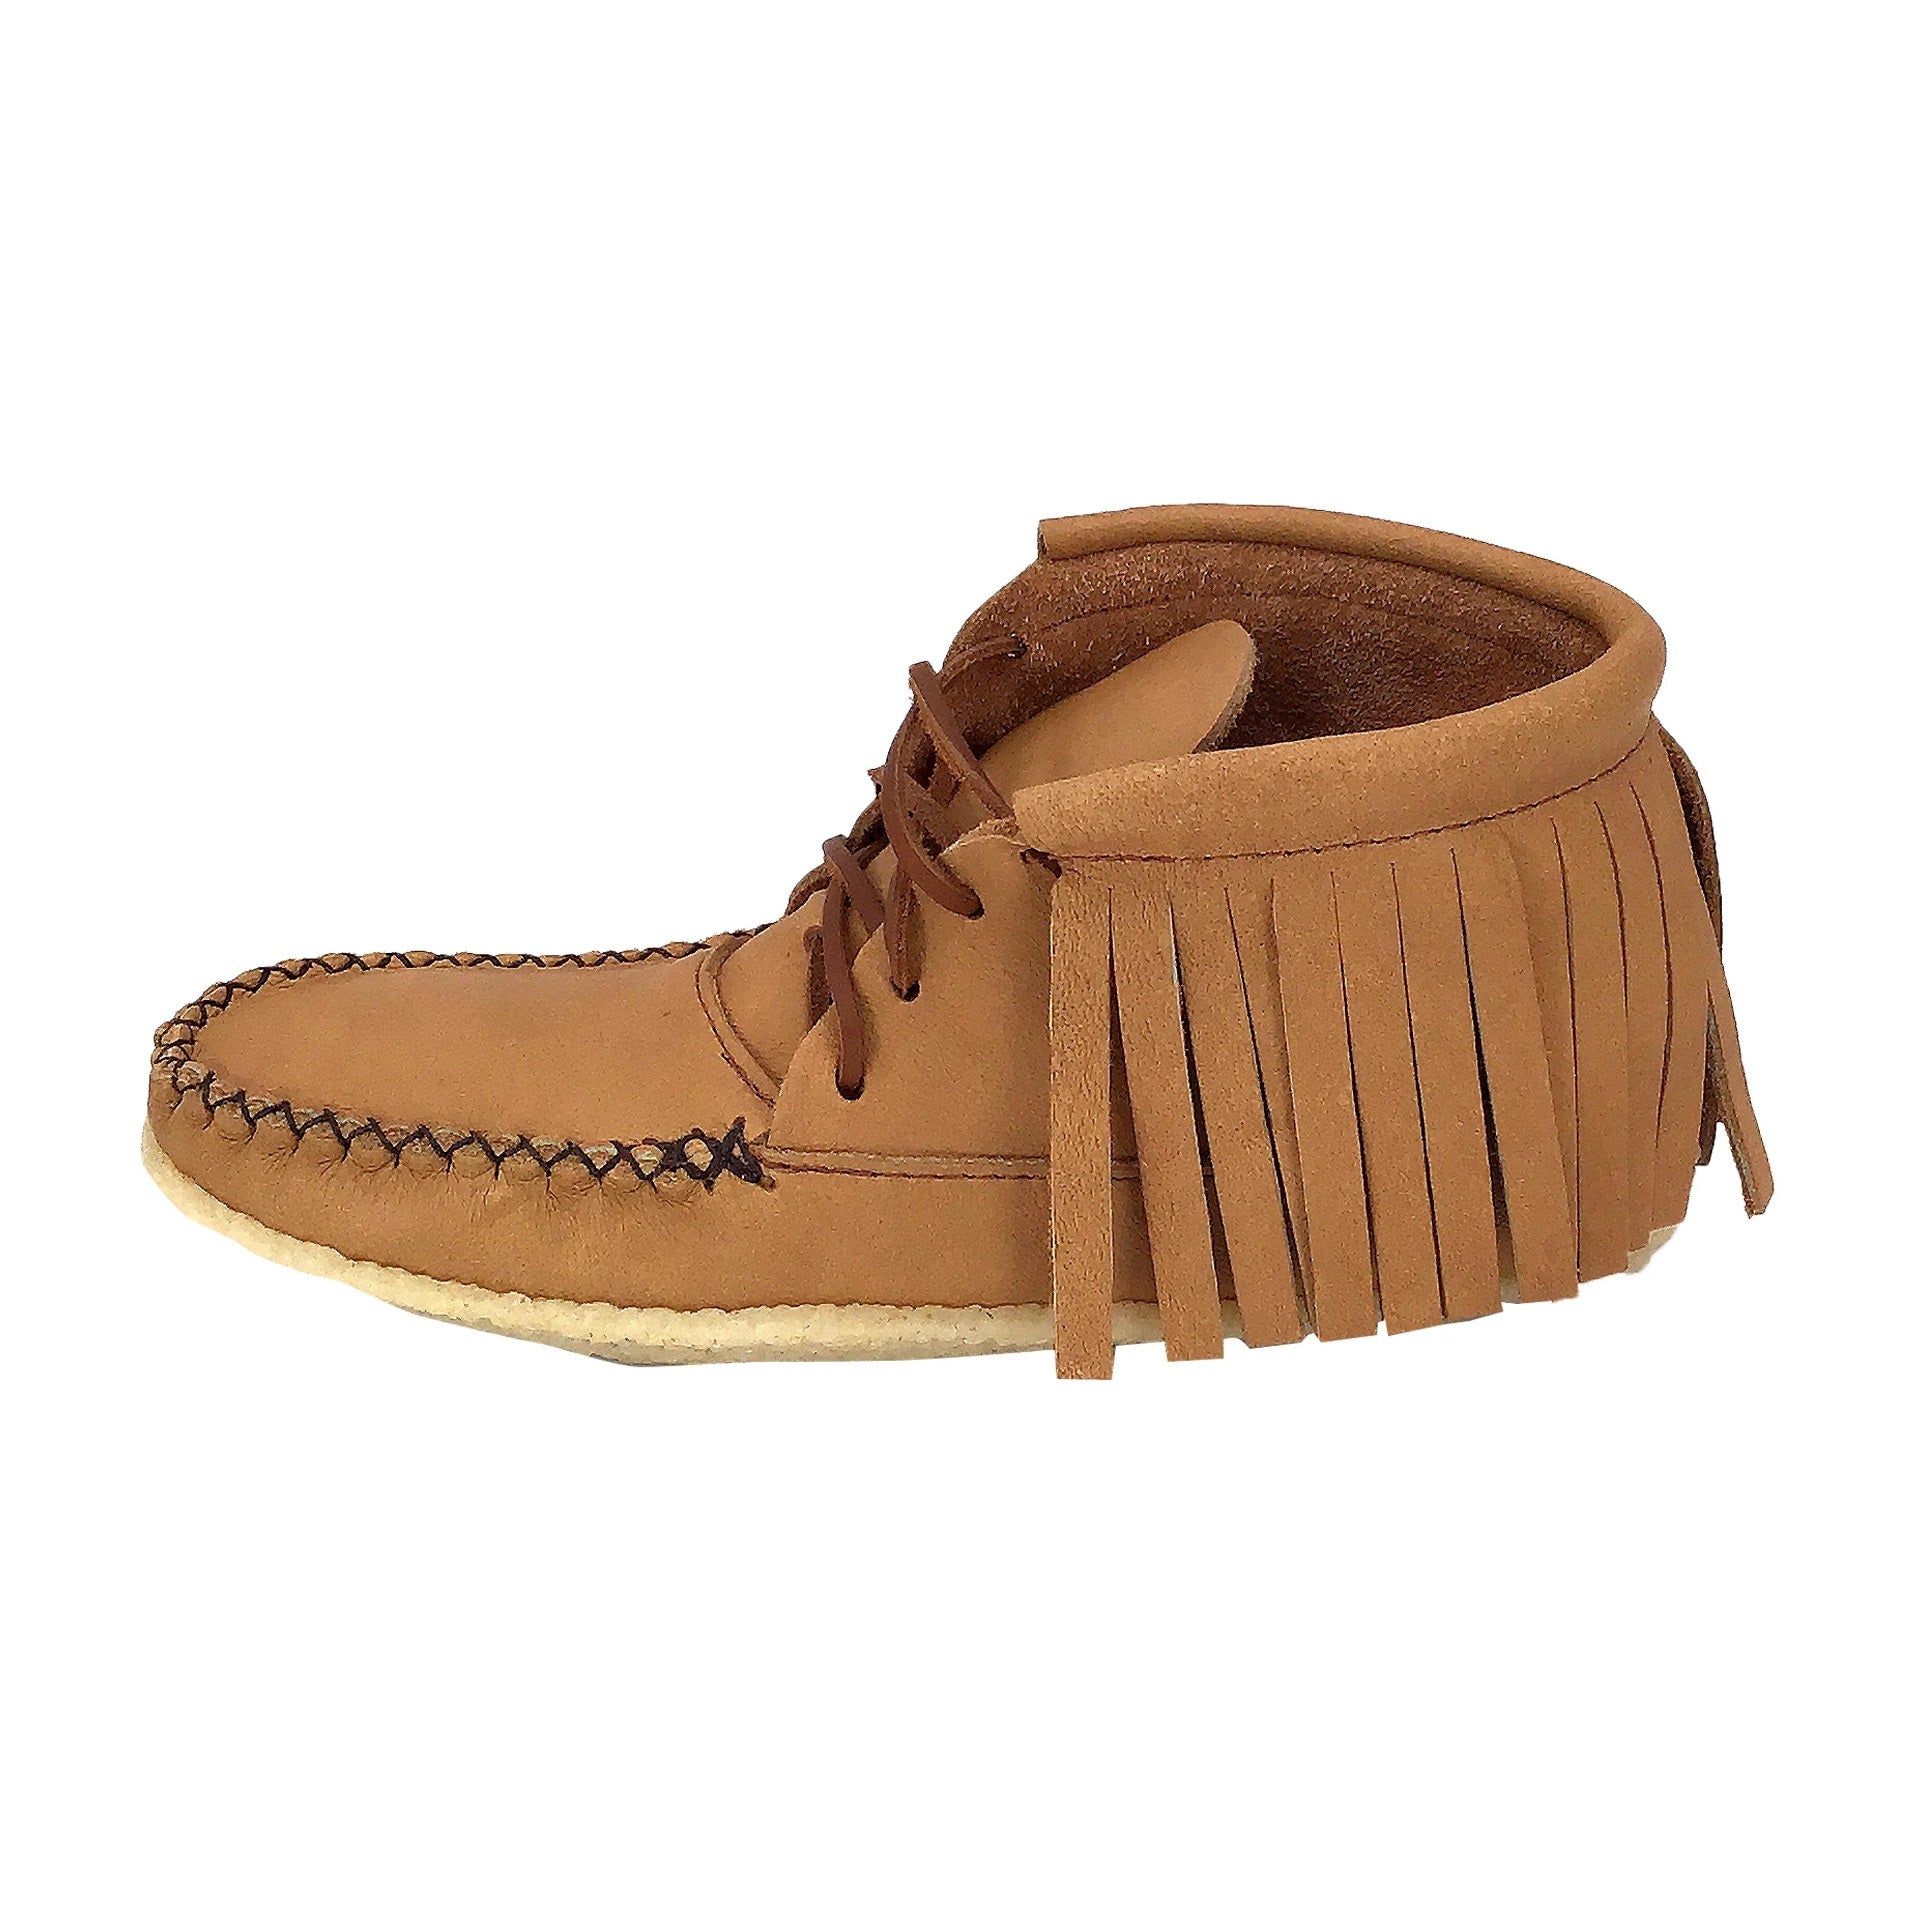 Women's Earthing Moccasin Boots with Copper Rivet Ankle Fringe Crepe Sole